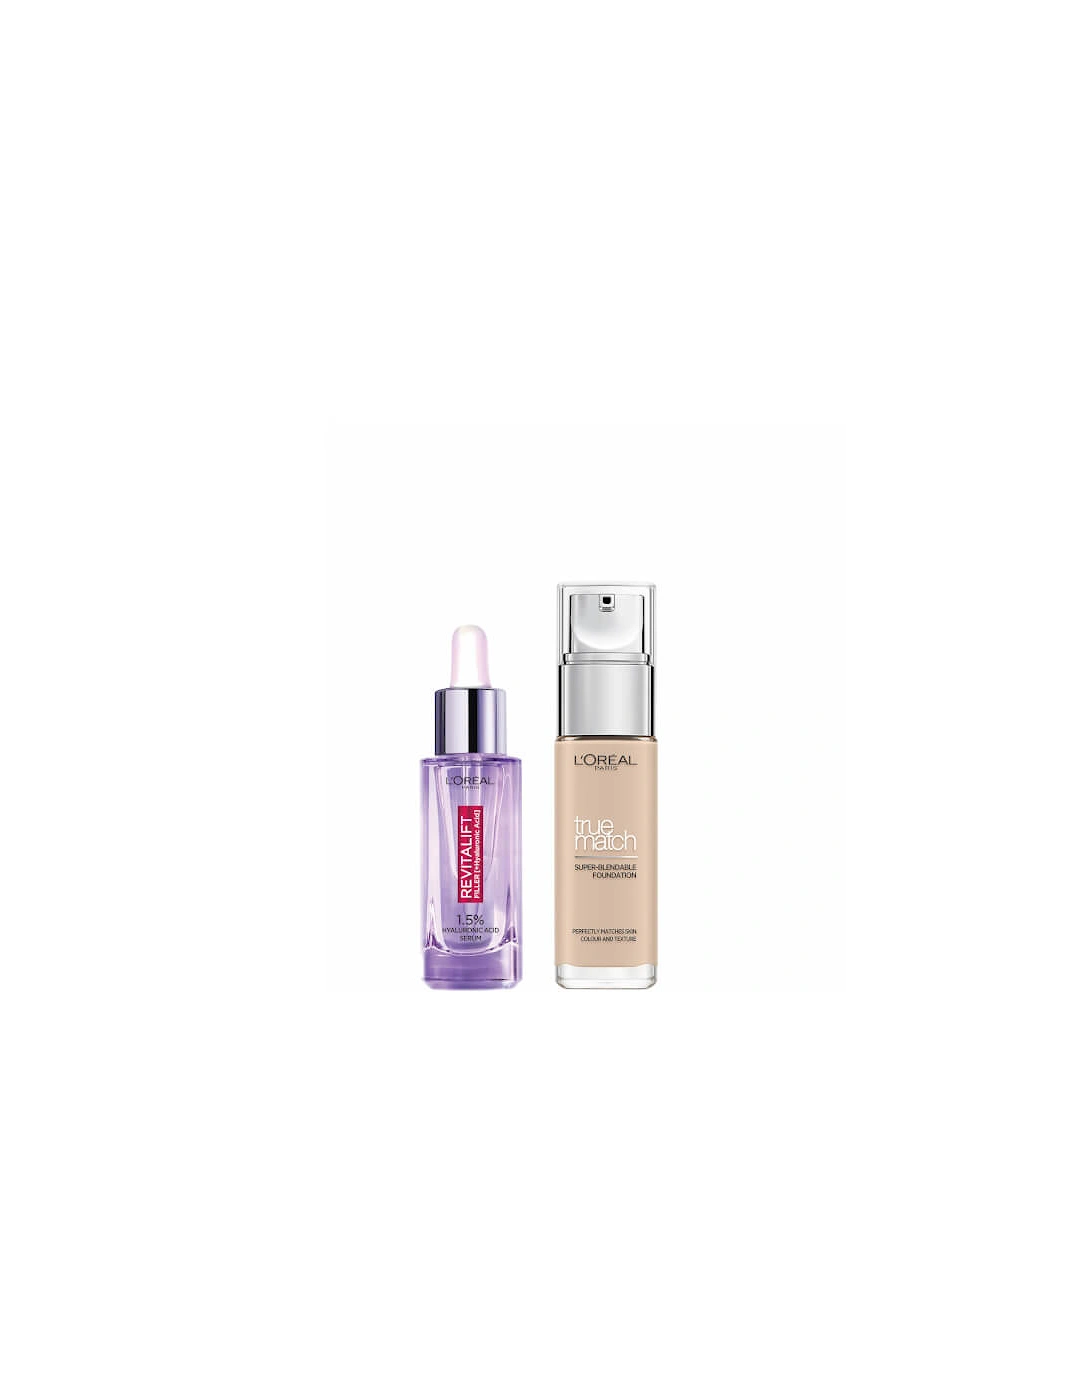 L’Oreal Paris Hyaluronic Acid Filler Serum and True Match Hyaluronic Acid Foundation Duo - 1C Rose Ivory, 2 of 1